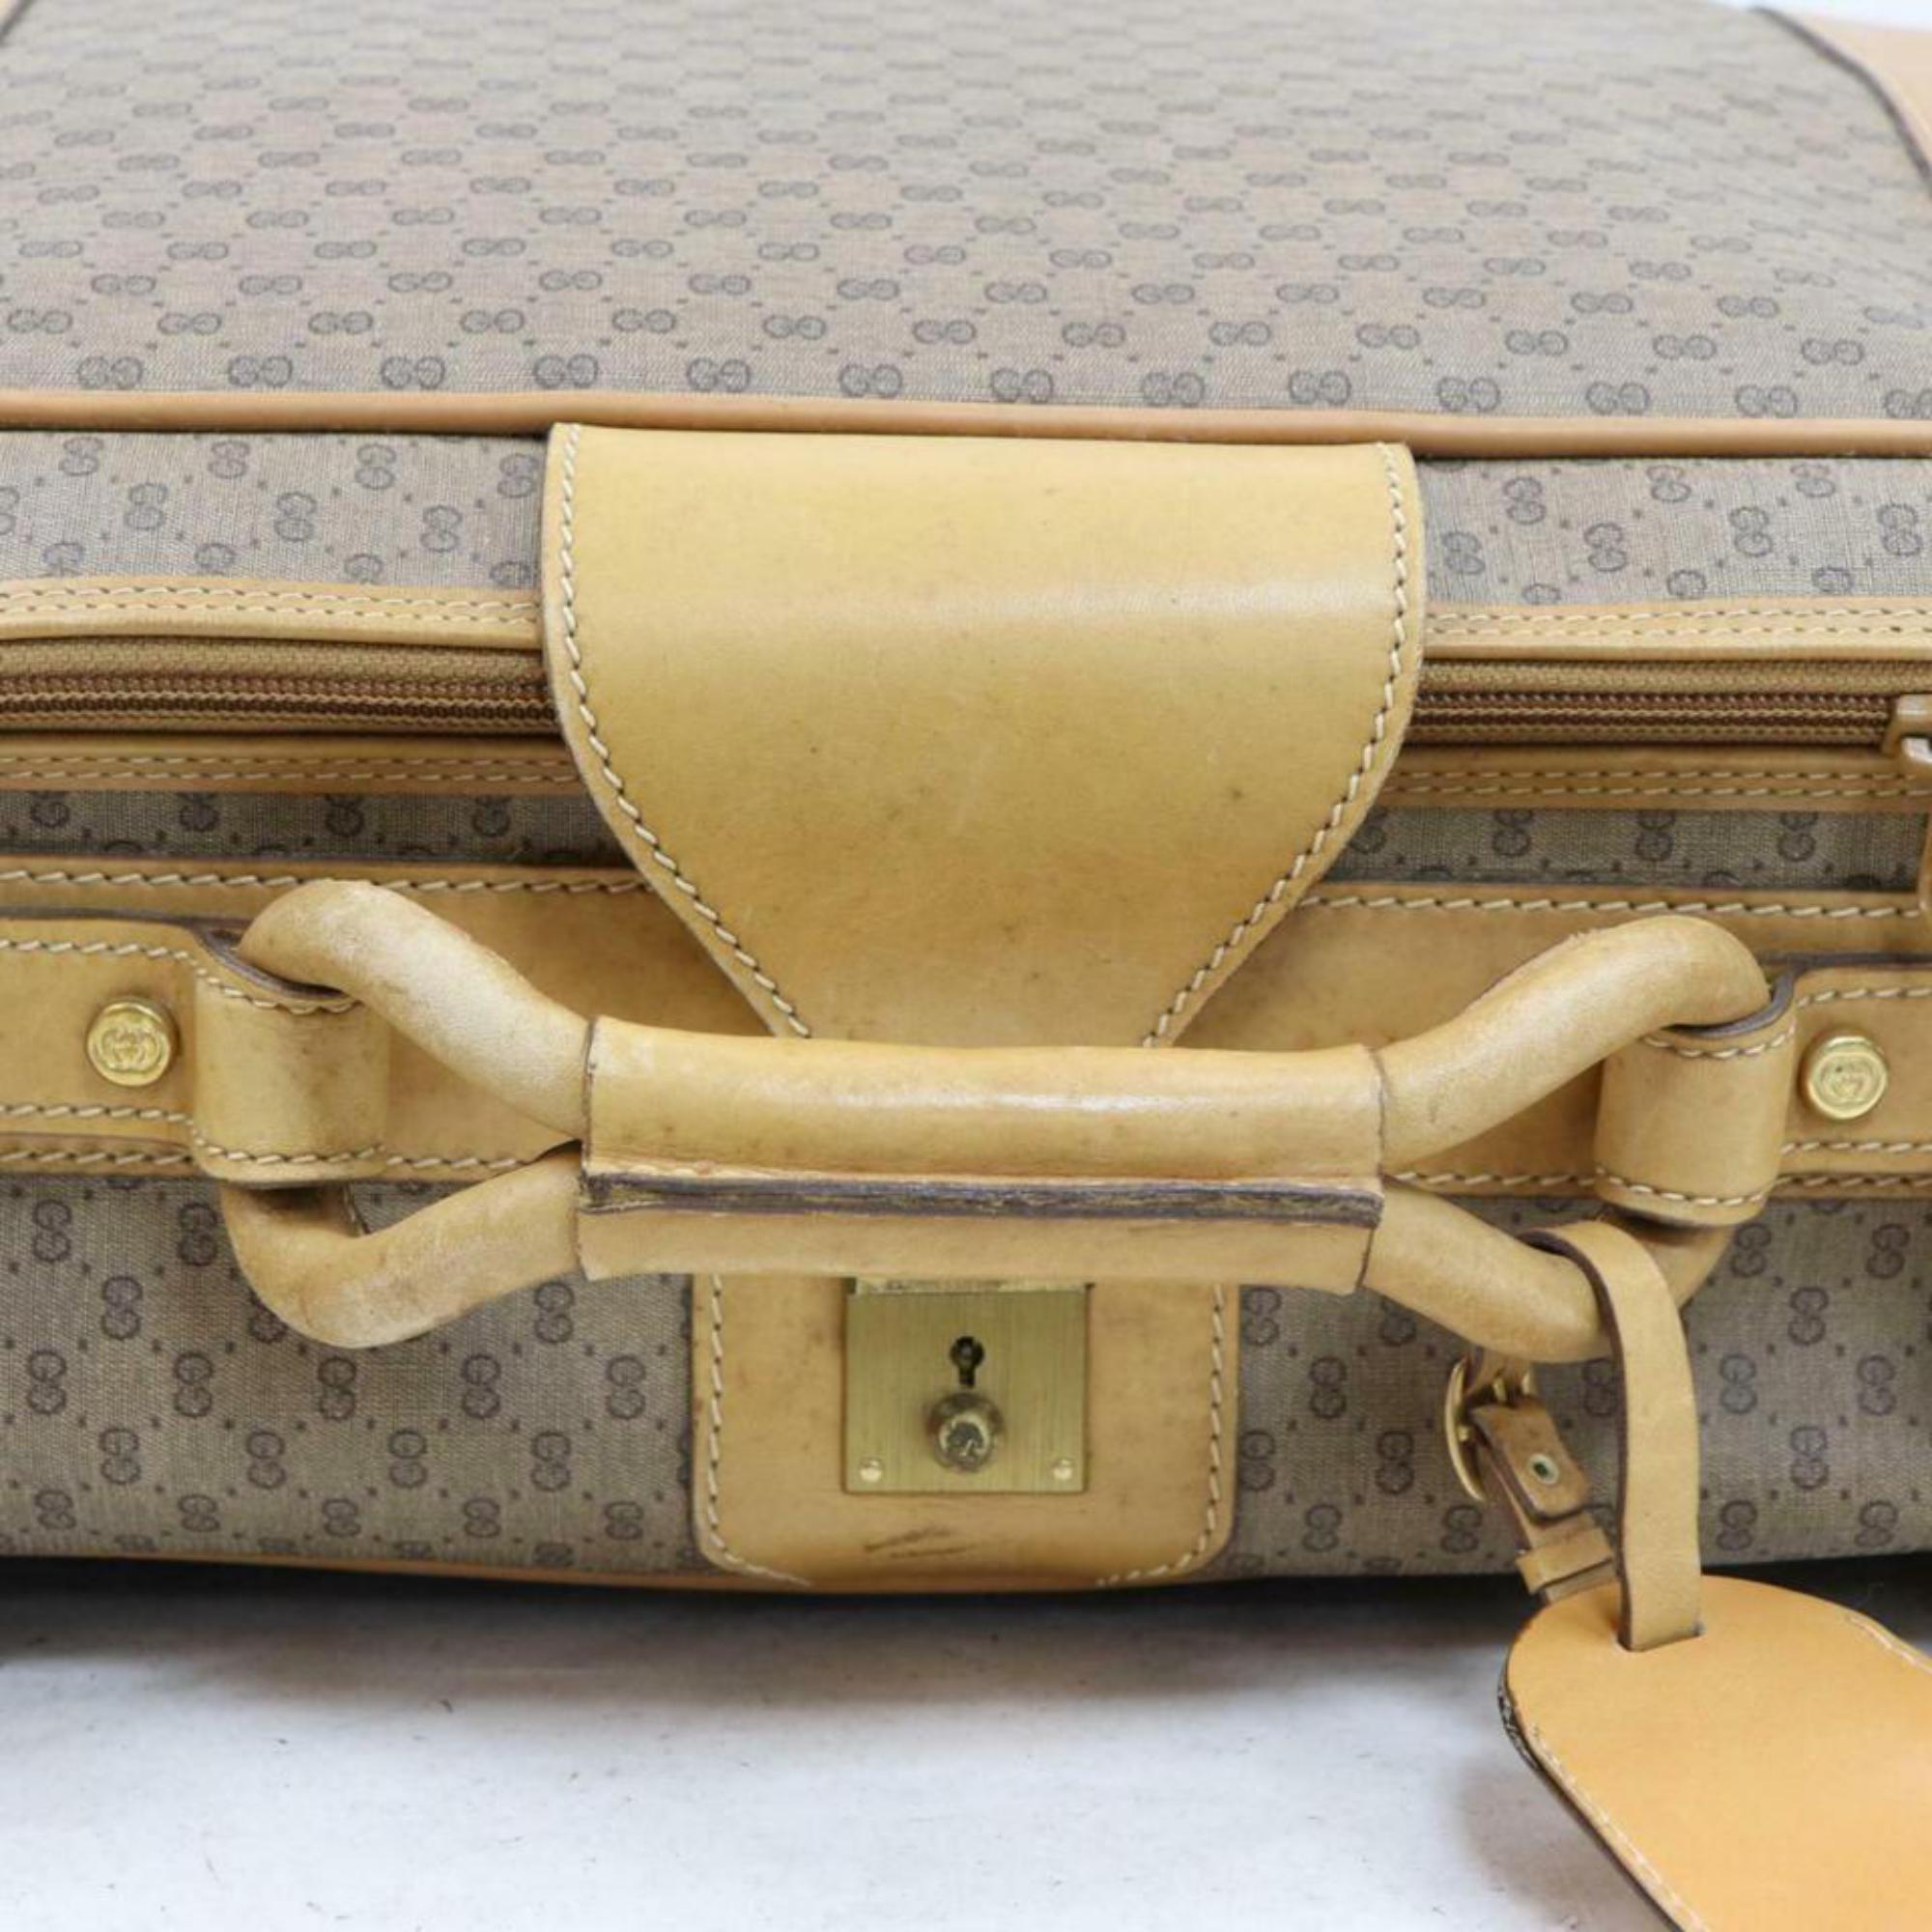 Women's or Men's Gucci Micro Gg Logo Suitcase Luggage 870257 Coated Canvas Weekend/Travel Bag For Sale